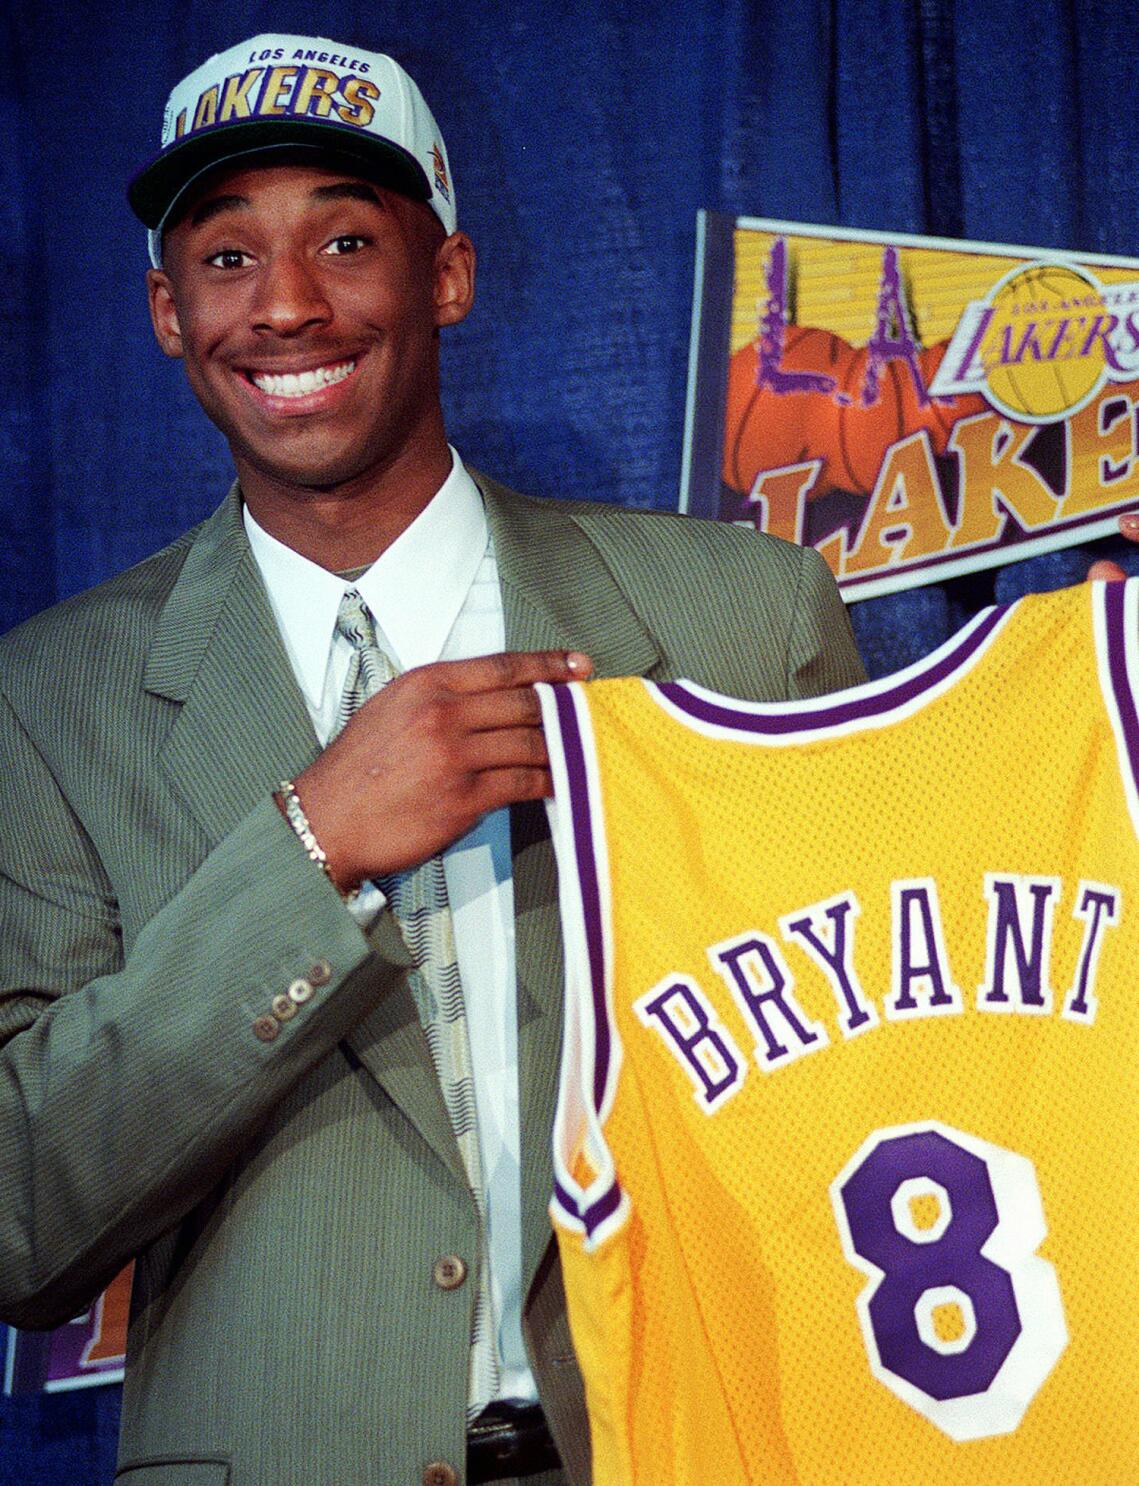 Kobe Bryant rookie jersey sells for record $3.69 million - Los Angeles Times